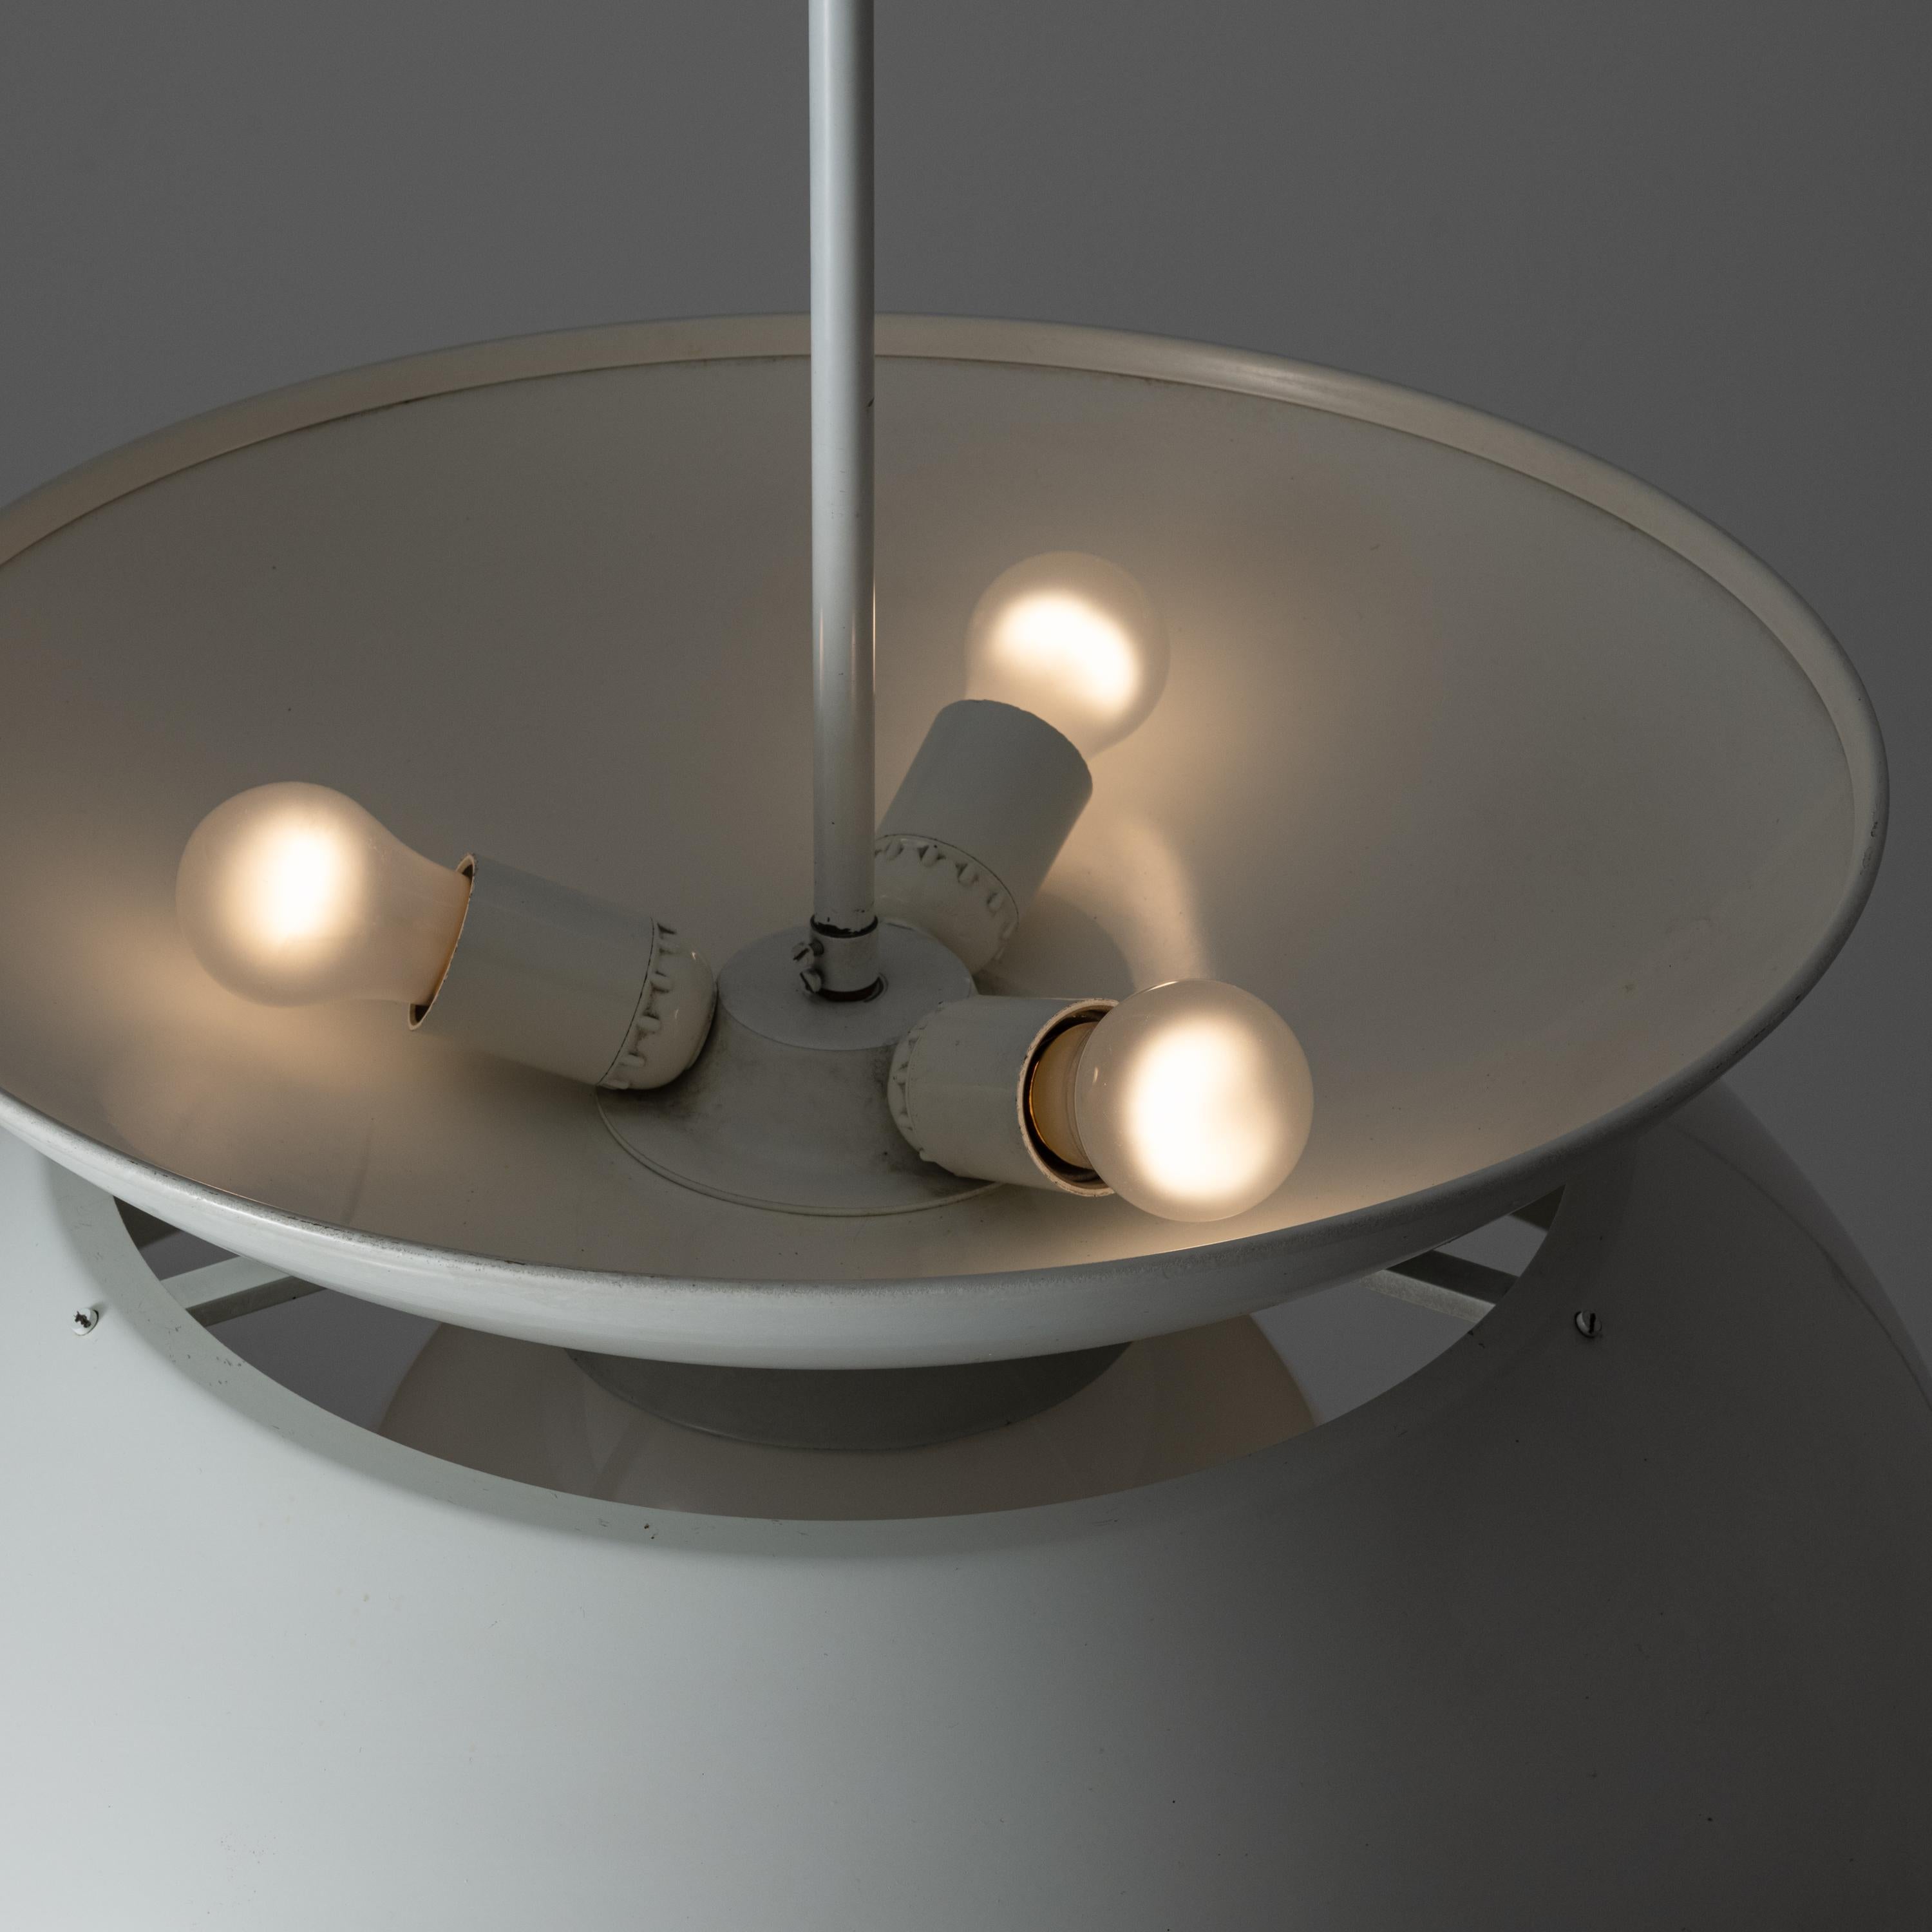 Mid-20th Century Cetra Ceiling Light by Vico Magistretti for Artemide